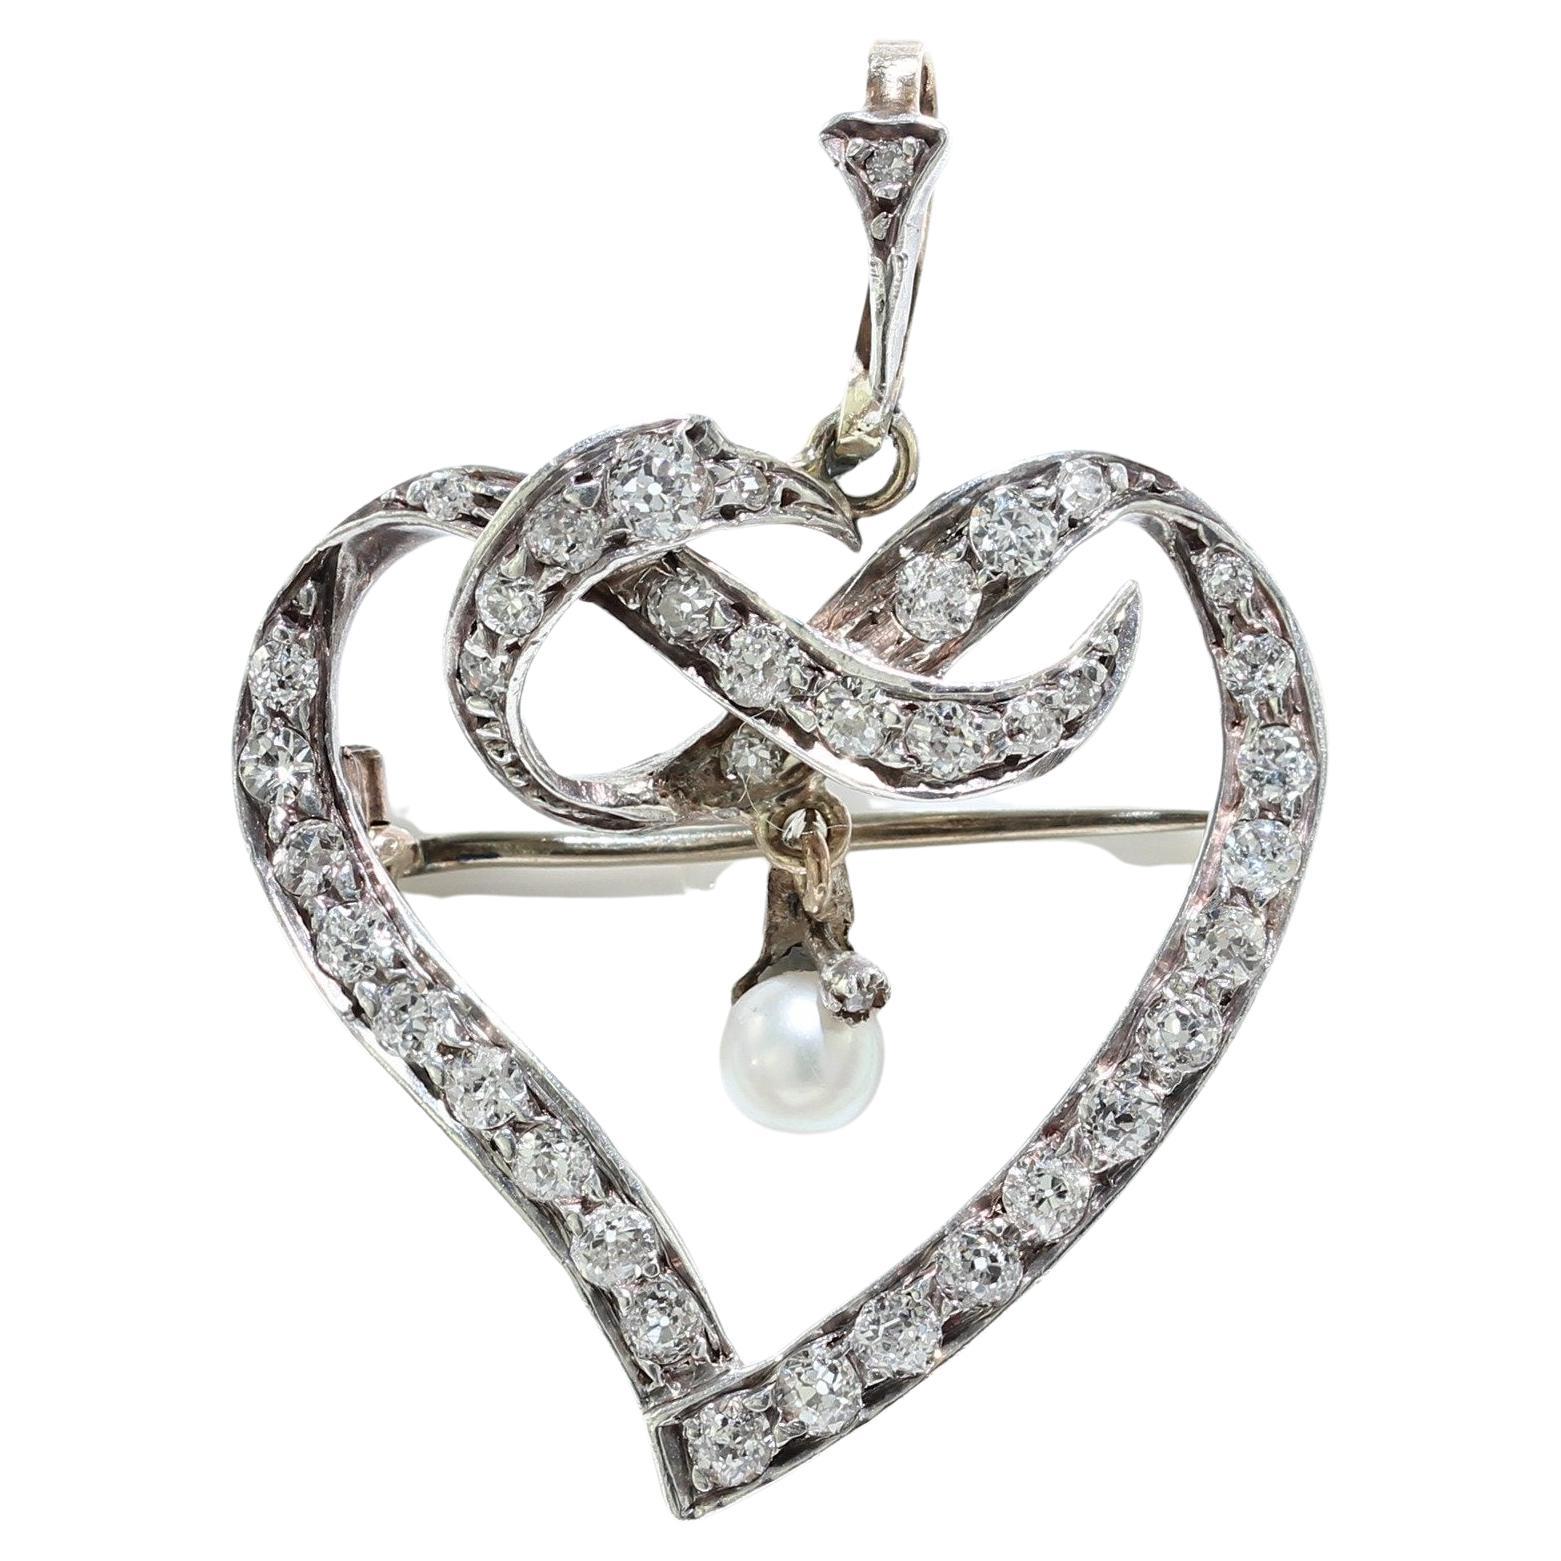 Art Deco Silver and Gold Heart Brooch with diamonds 